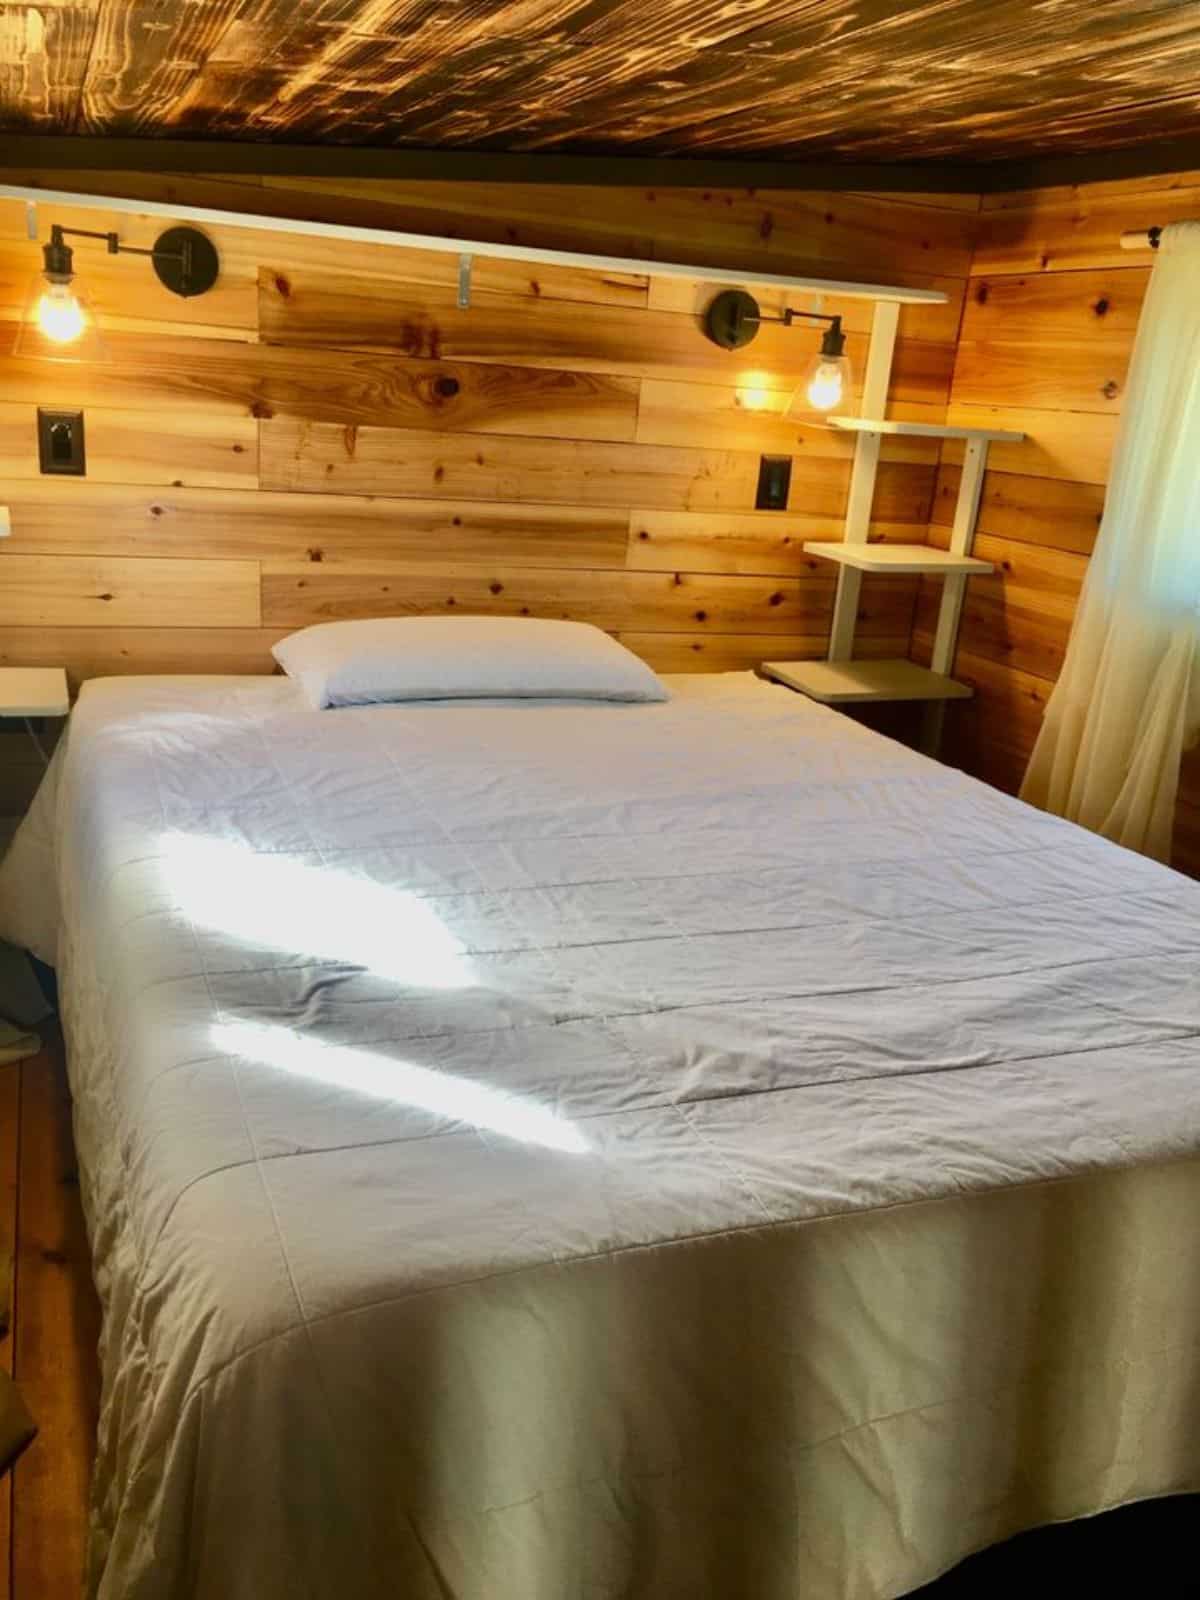 main floor bedroom of tiny home with two bedrooms has a very comfortable bed with ample space left for other items